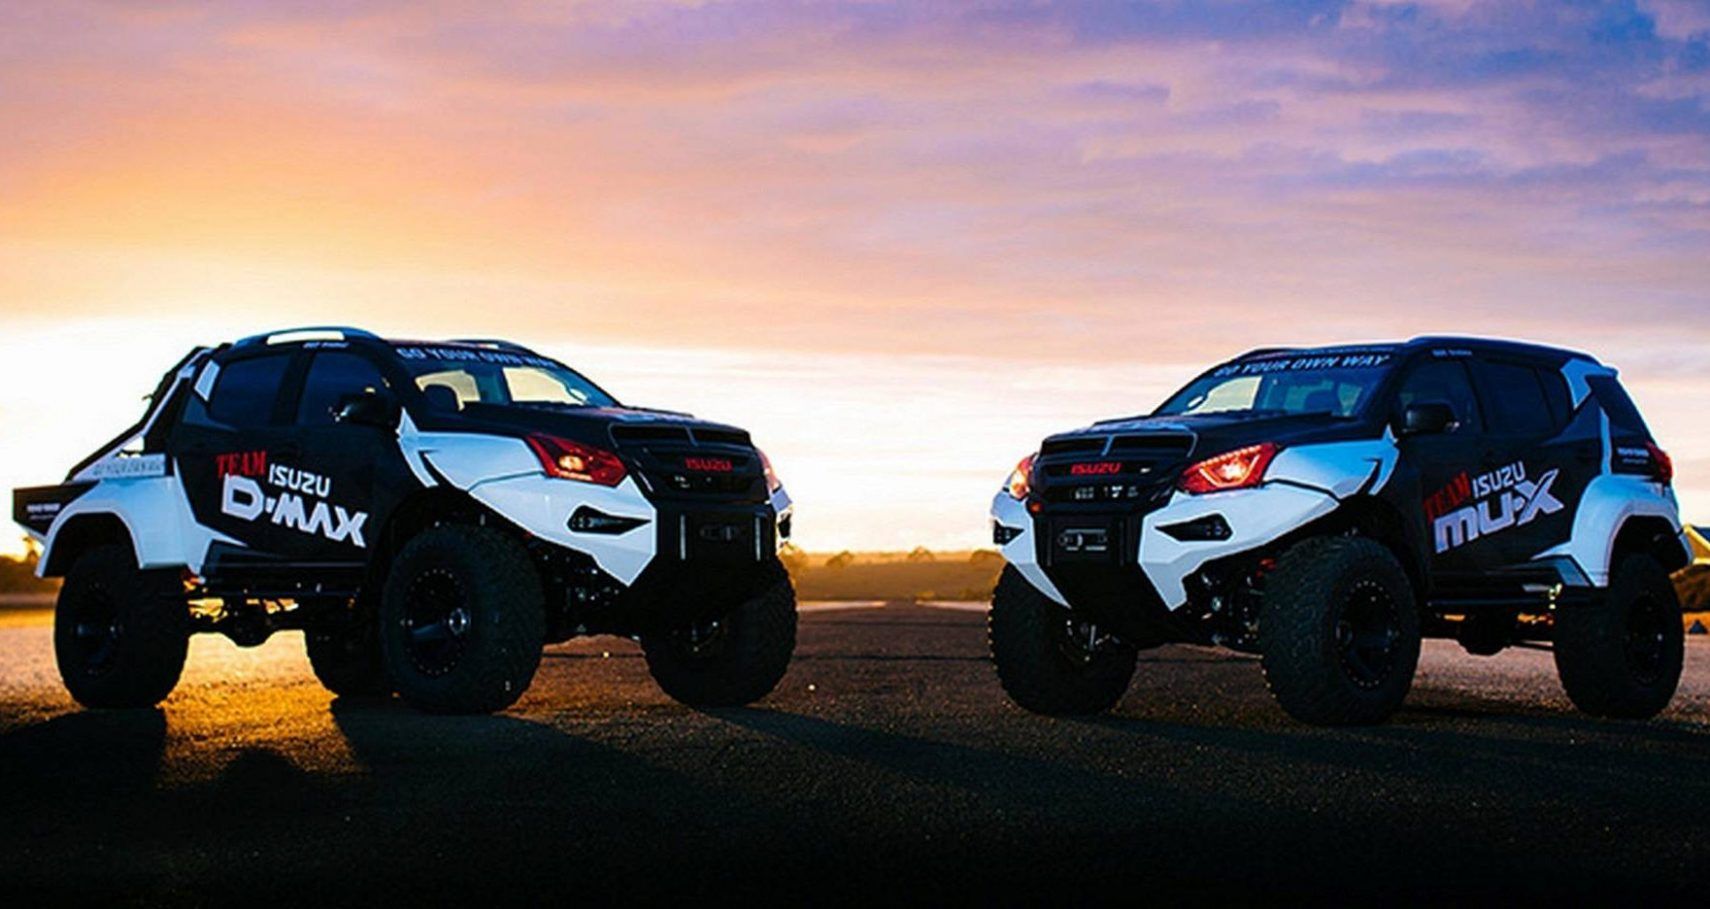 Isuzu Concept X Check Out These Off Roading Beasts